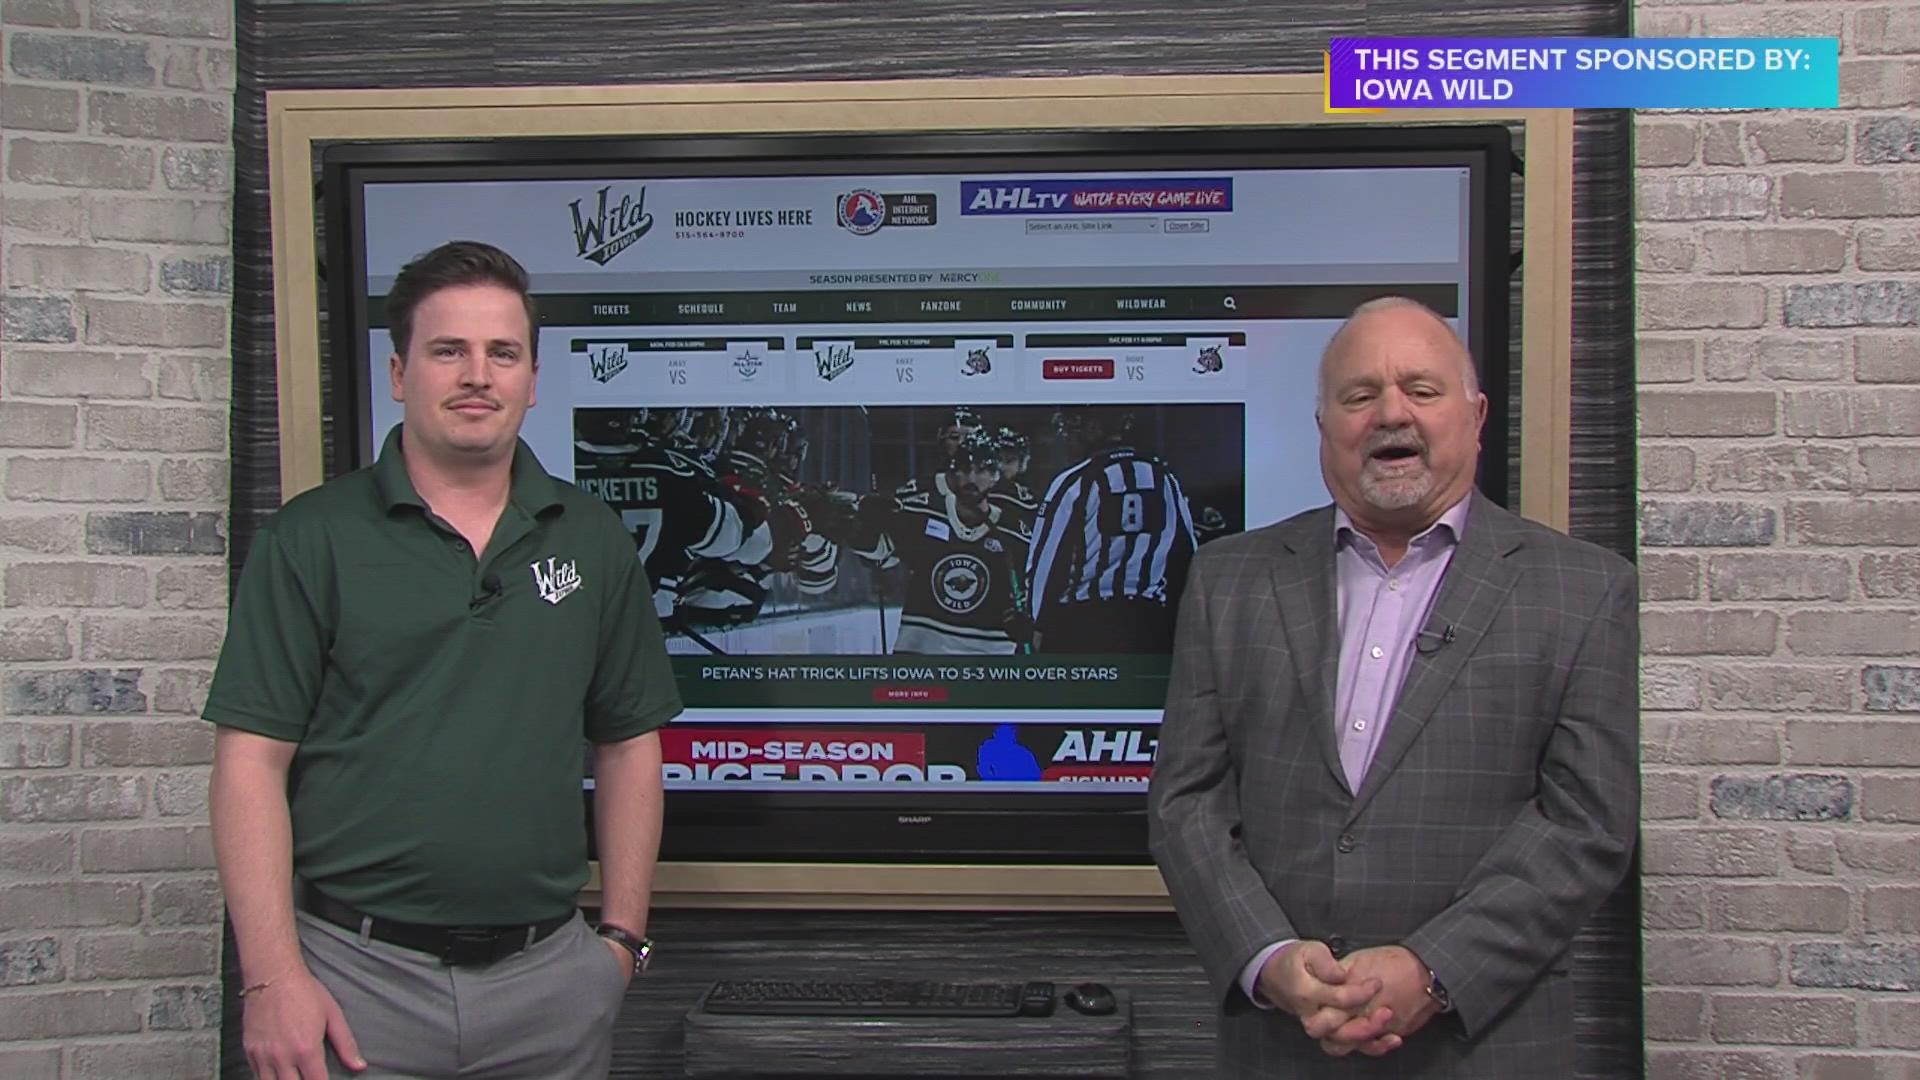 Alec is here to talk about the upcoming events that the Iowa Wild is planning | Paid Content